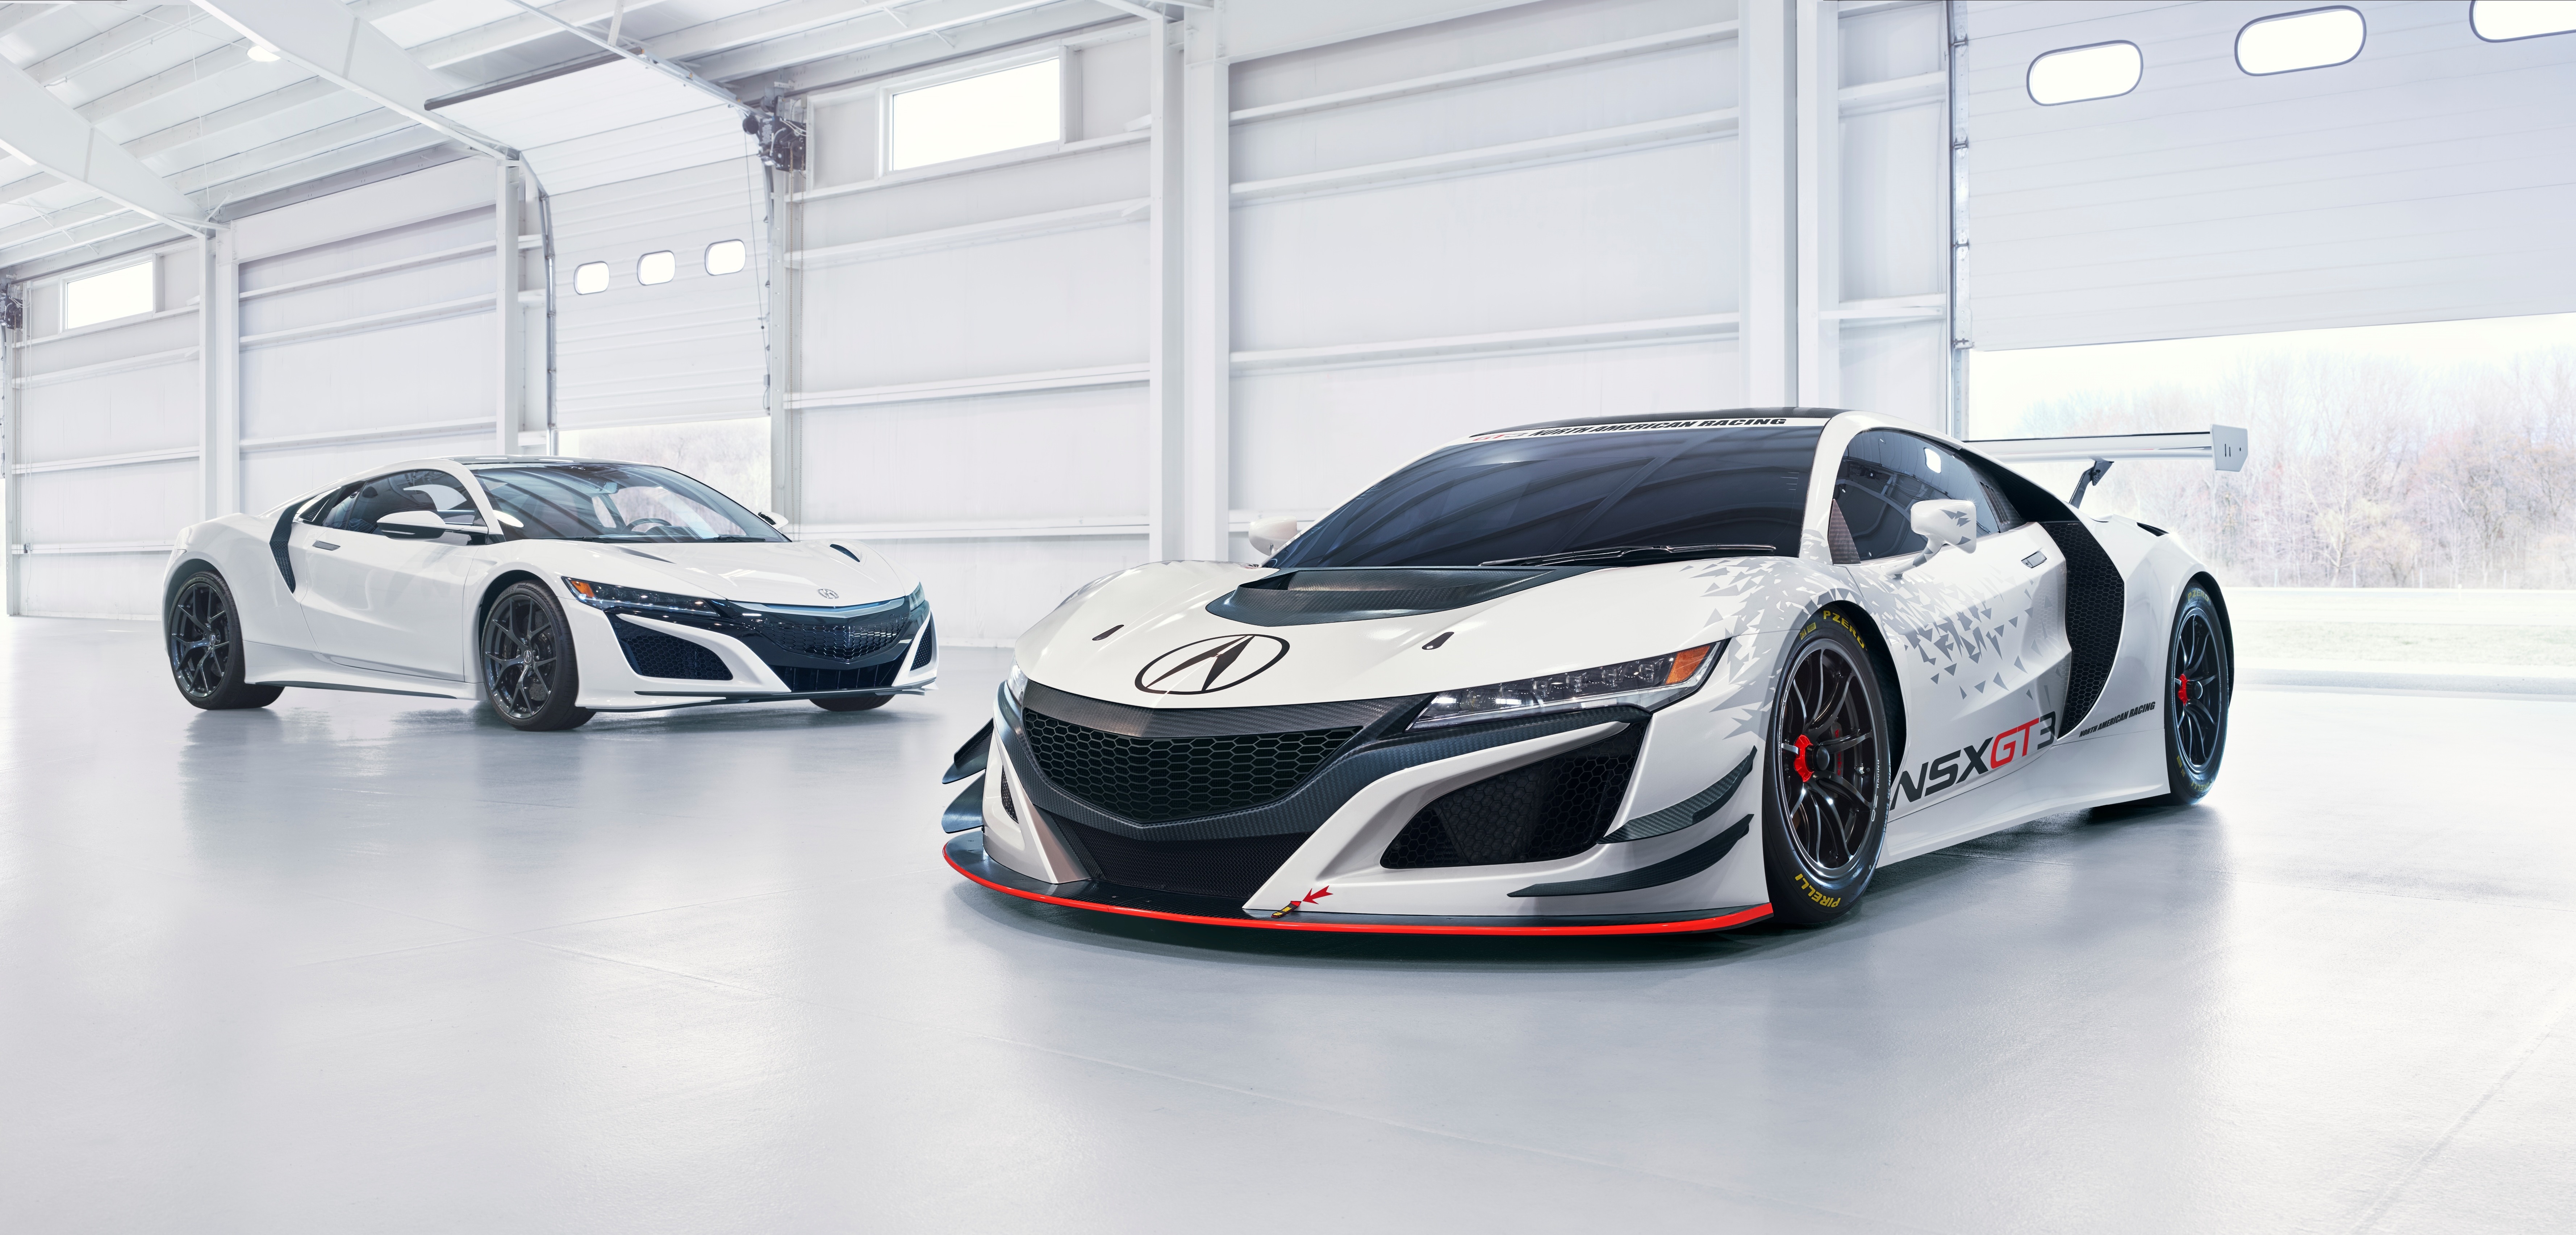 Wallpapers Acura Nsx Gt3 Acura Nsx Hond on the desktop